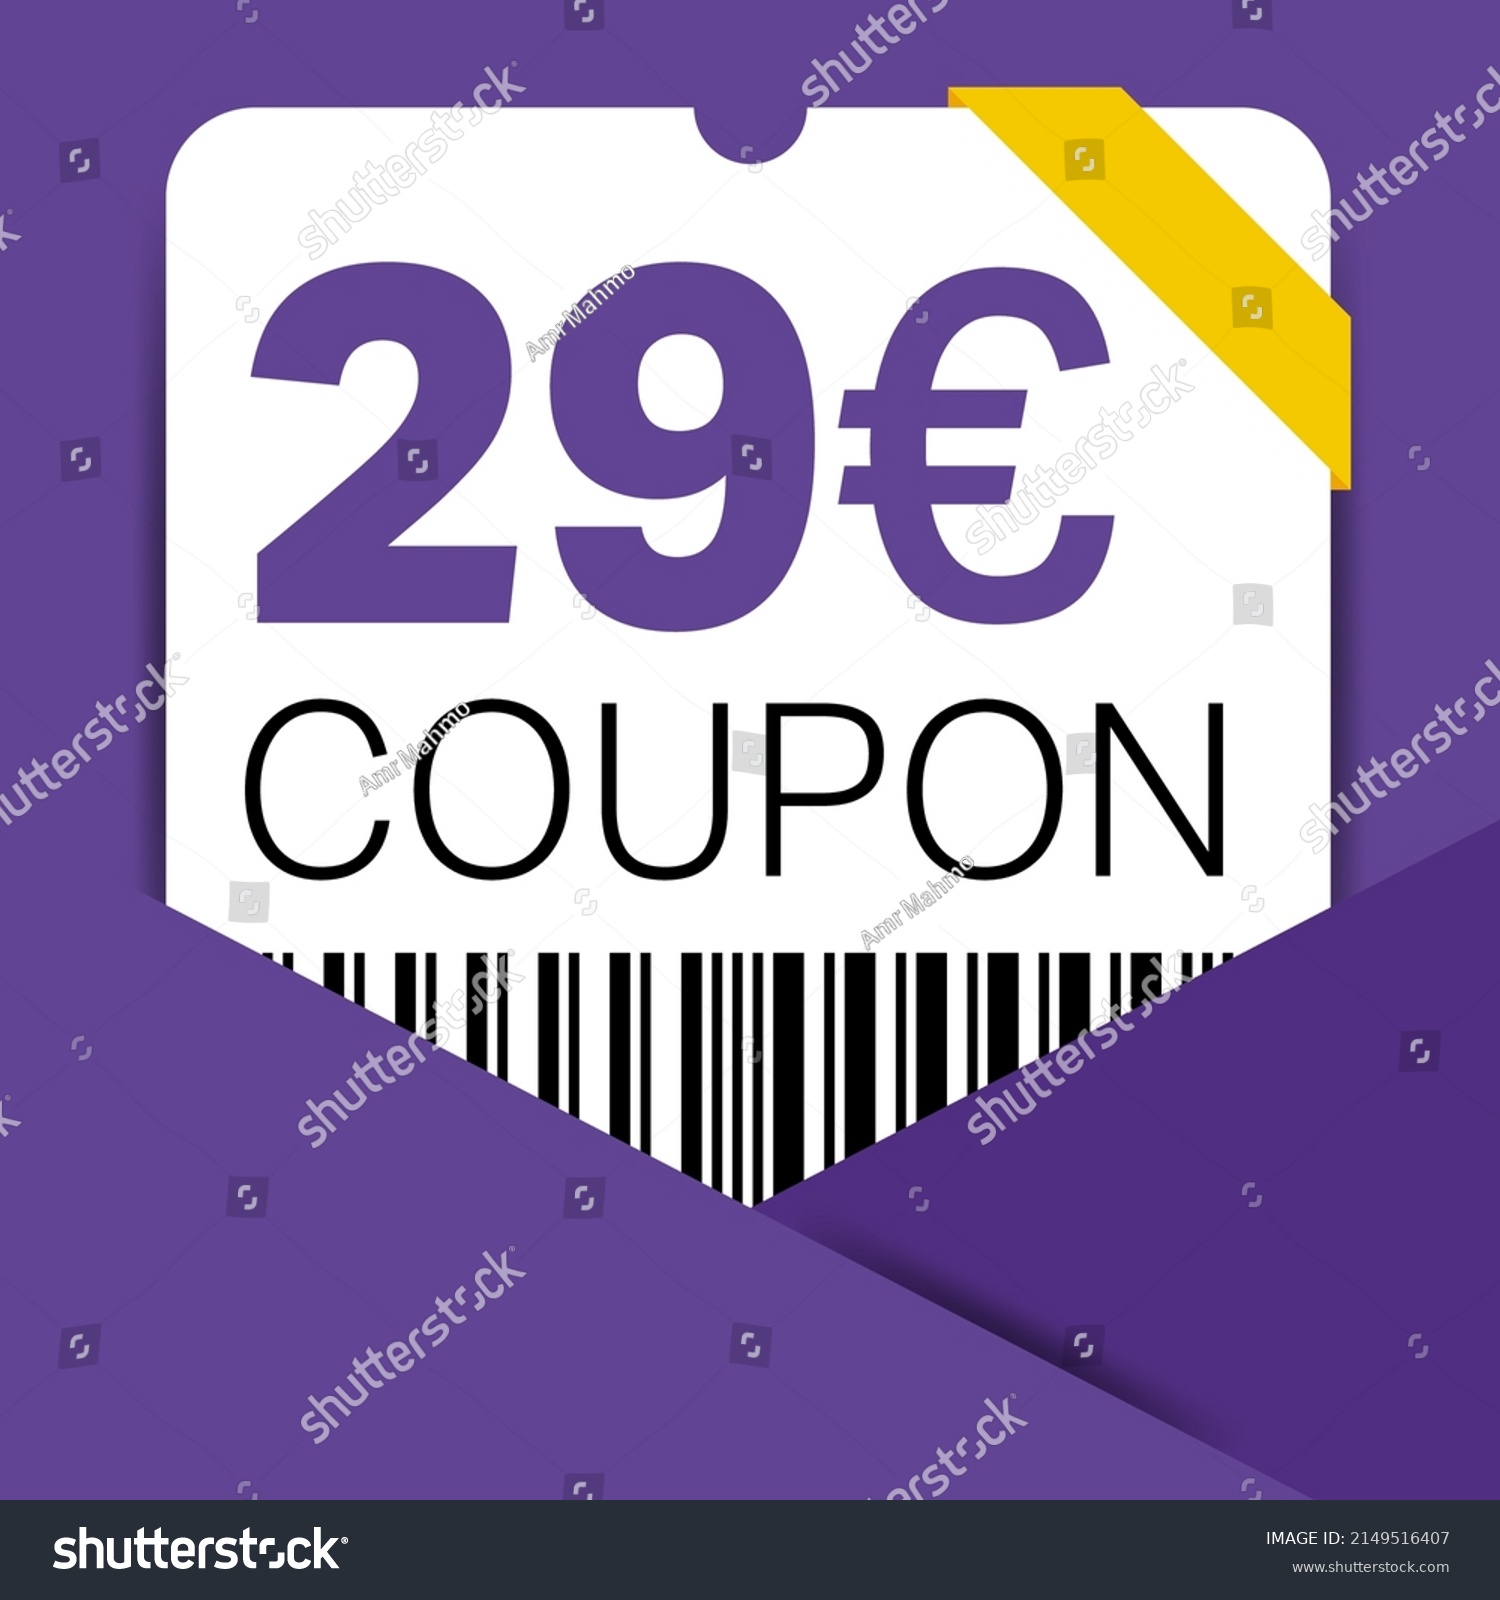 SVG of 29 Euro Coupon promotion sale for a website, internet ads, social media gift 29 off discount voucher. Big sale and super sale coupon discount. Price Tag Mega Coupon discount with vector illustration. svg